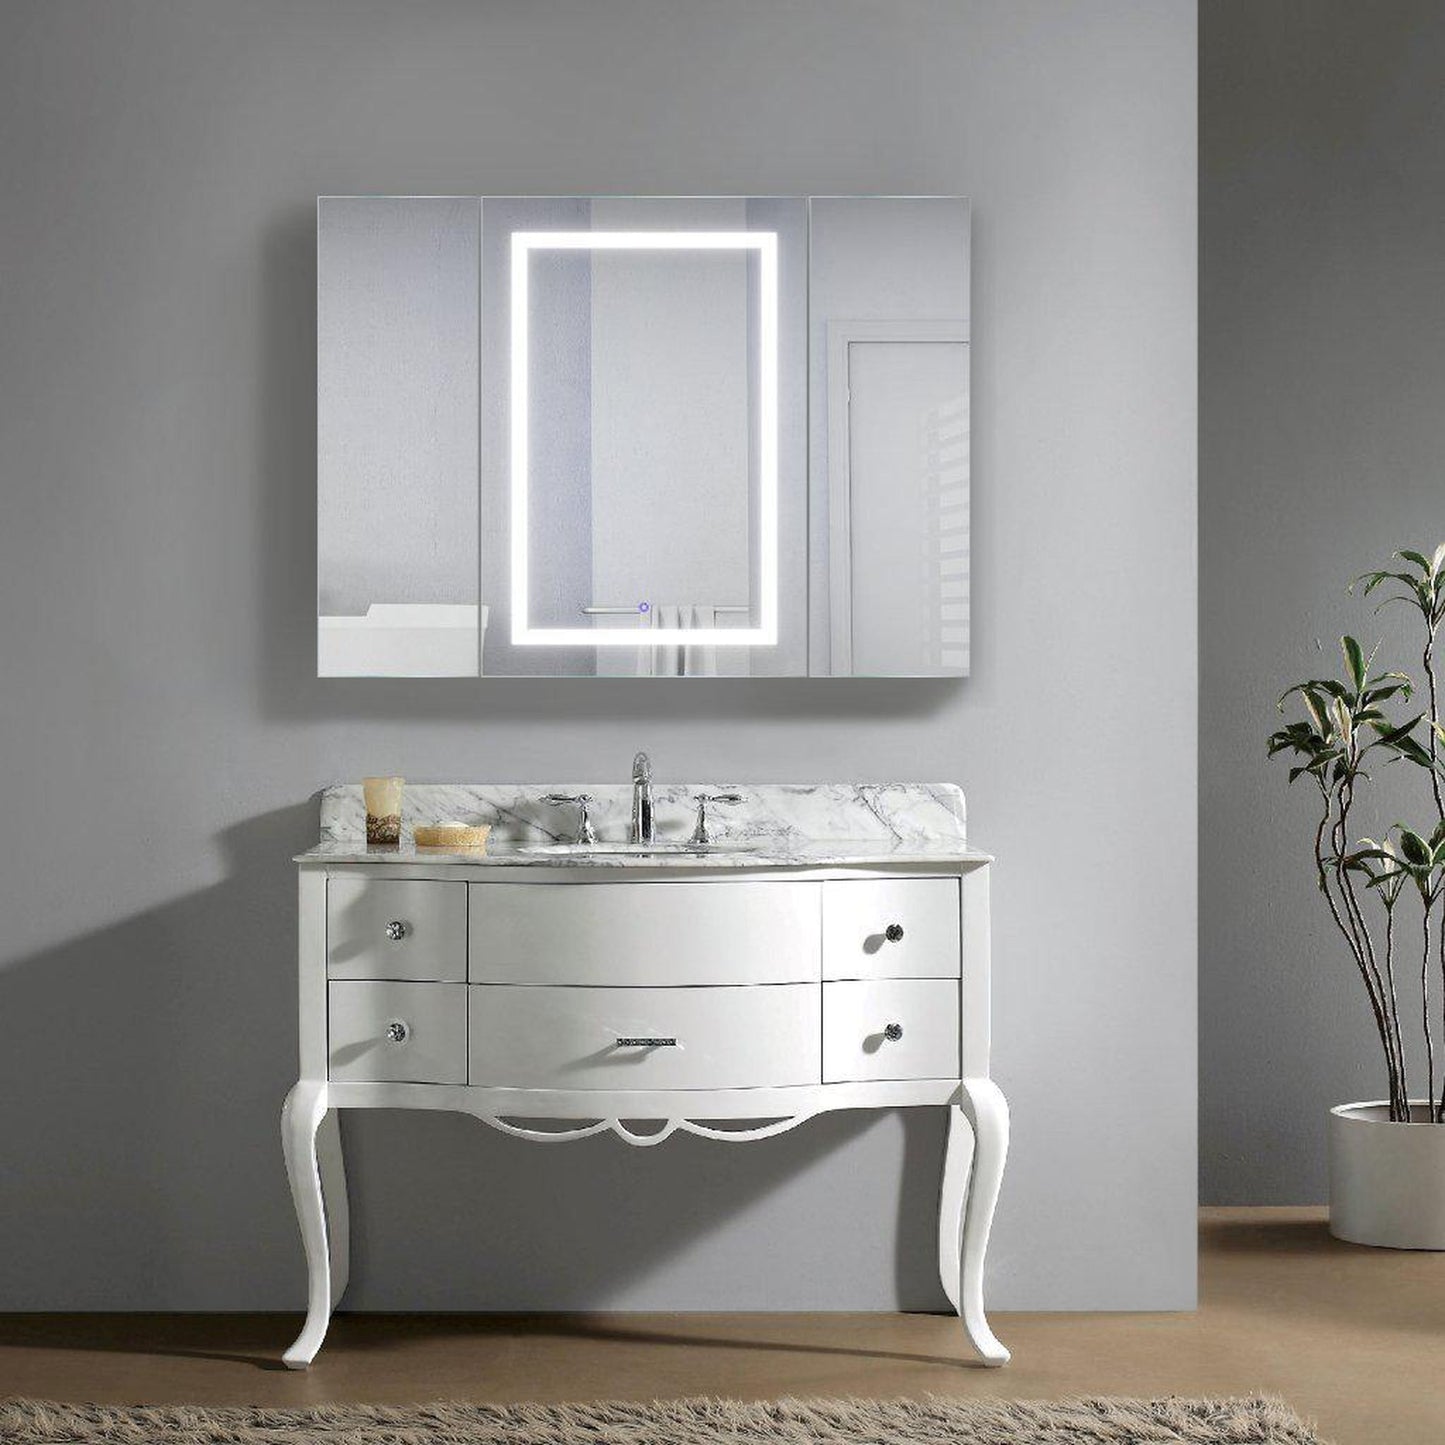 Krugg Reflections Svange 48" x 36" 5000K Single Tri-View Left-Left-Right Opening Recessed/Surface-Mount Illuminated Silver Backed LED Medicine Cabinet Mirror With Built-in Defogger, Dimmer and Electrical Outlet